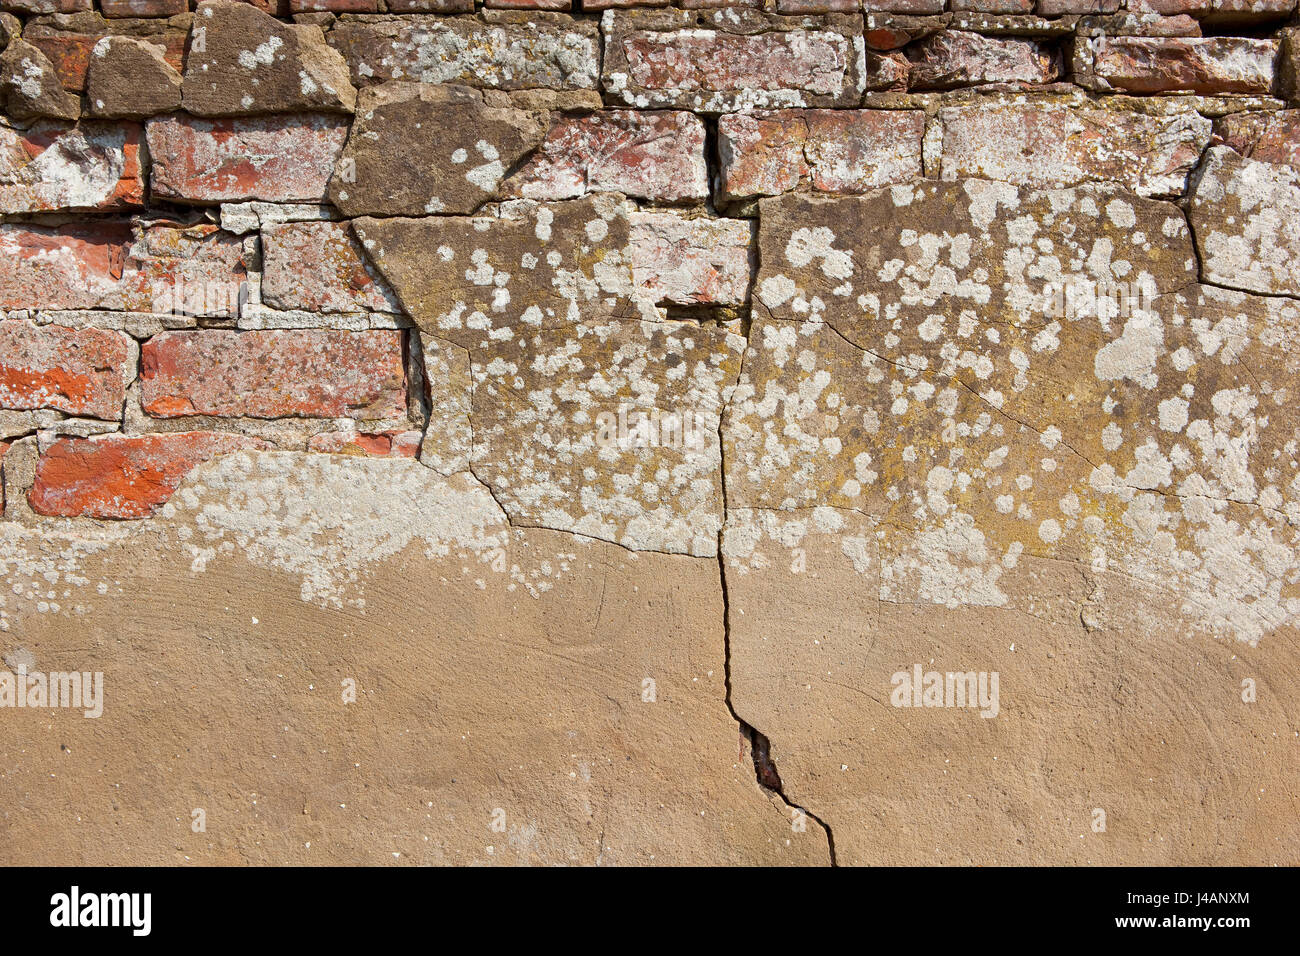 background image of an old weathered brick wall with cracked cement rendering Stock Photo